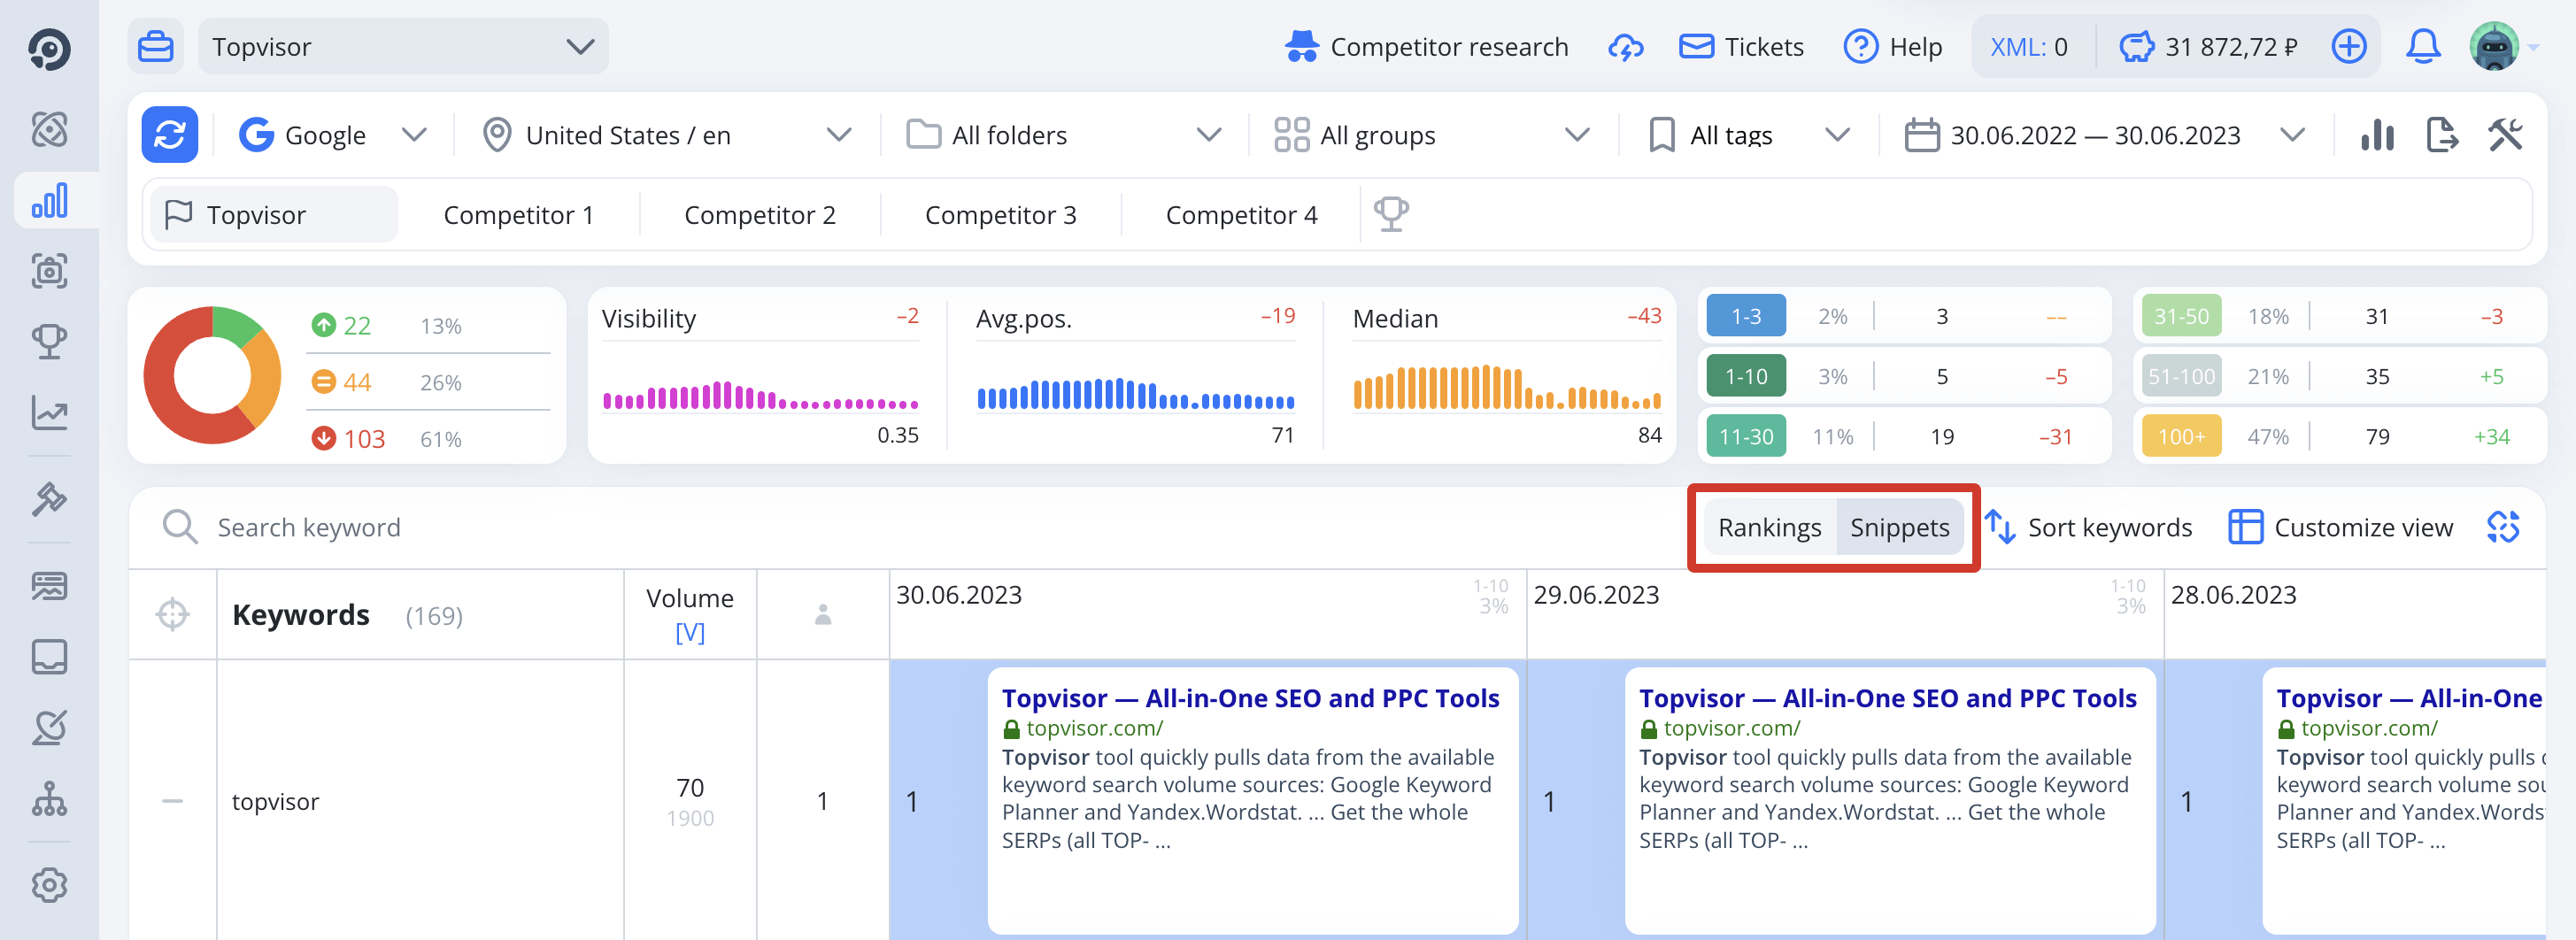 Rank Tracker, Snippets: How to view snippets